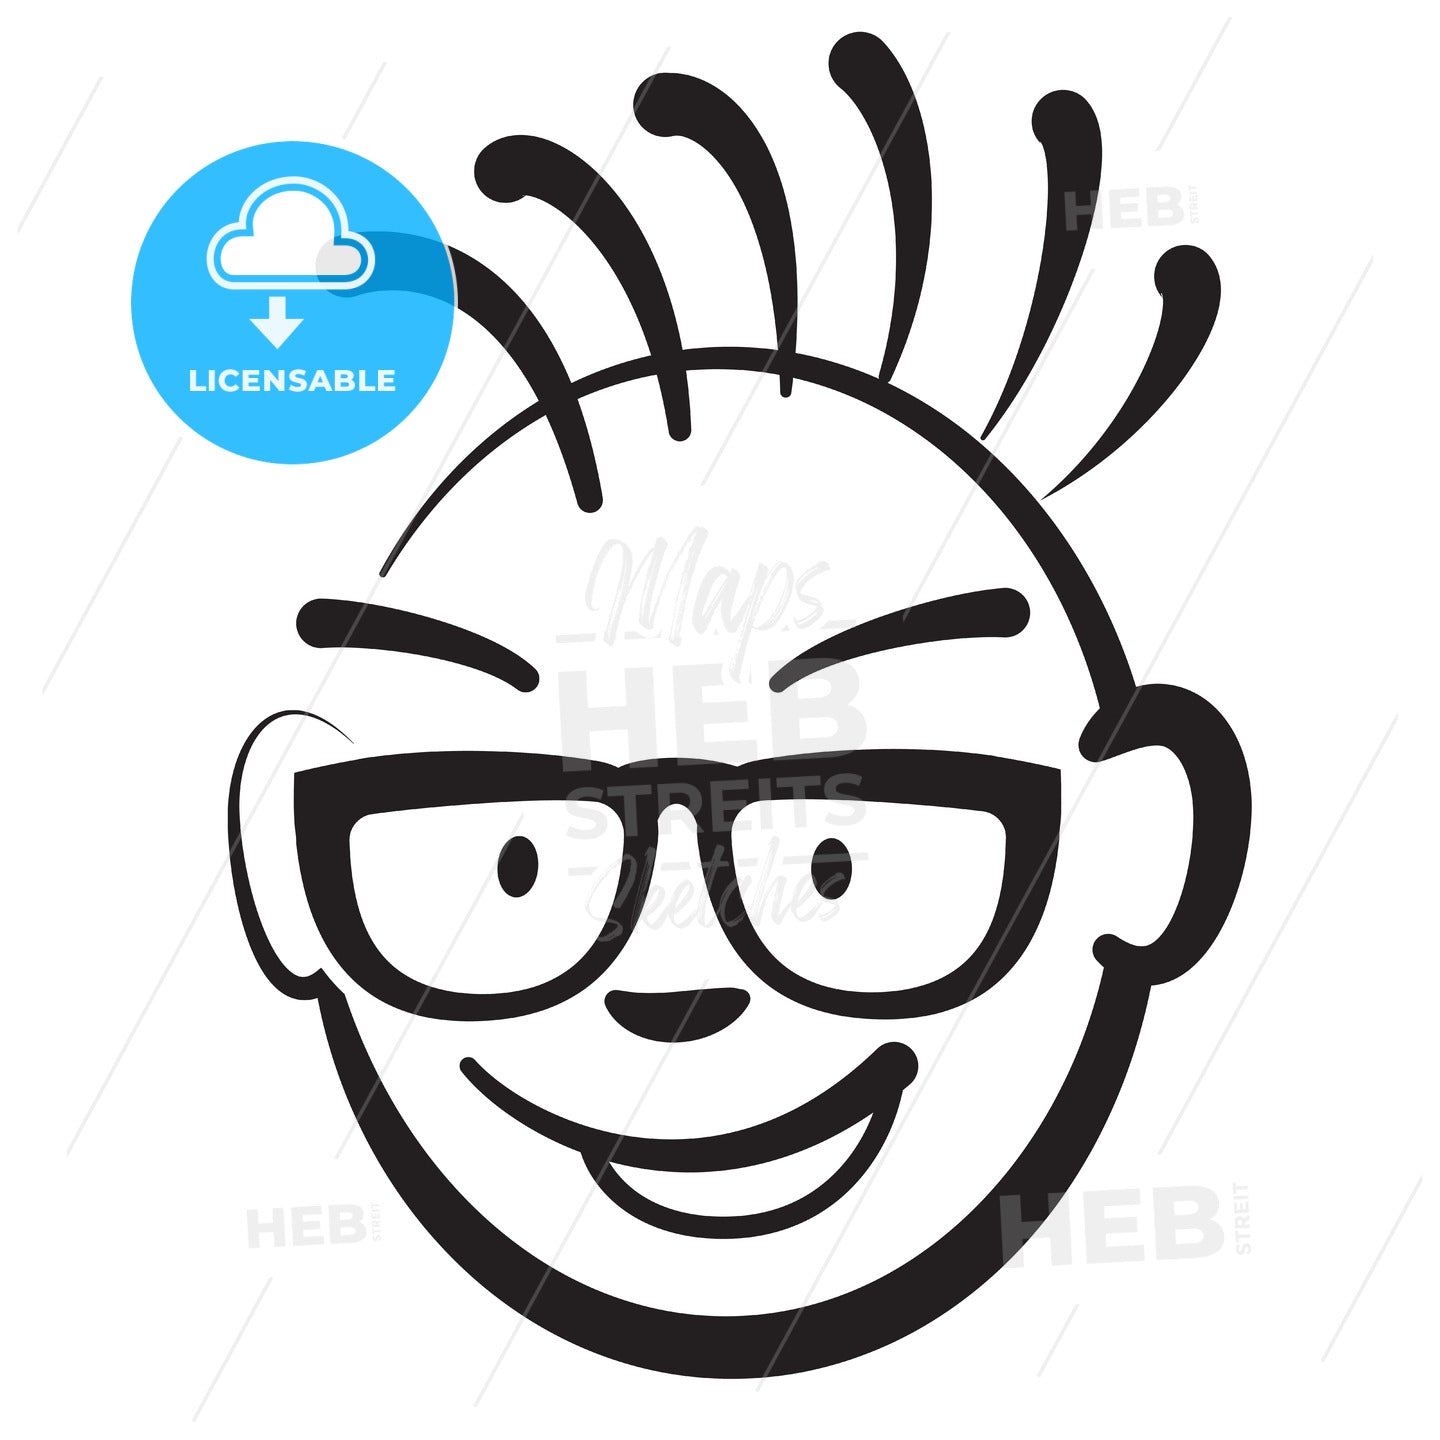 Stick Figure Man with Glasses, Vector Drawing on White Background